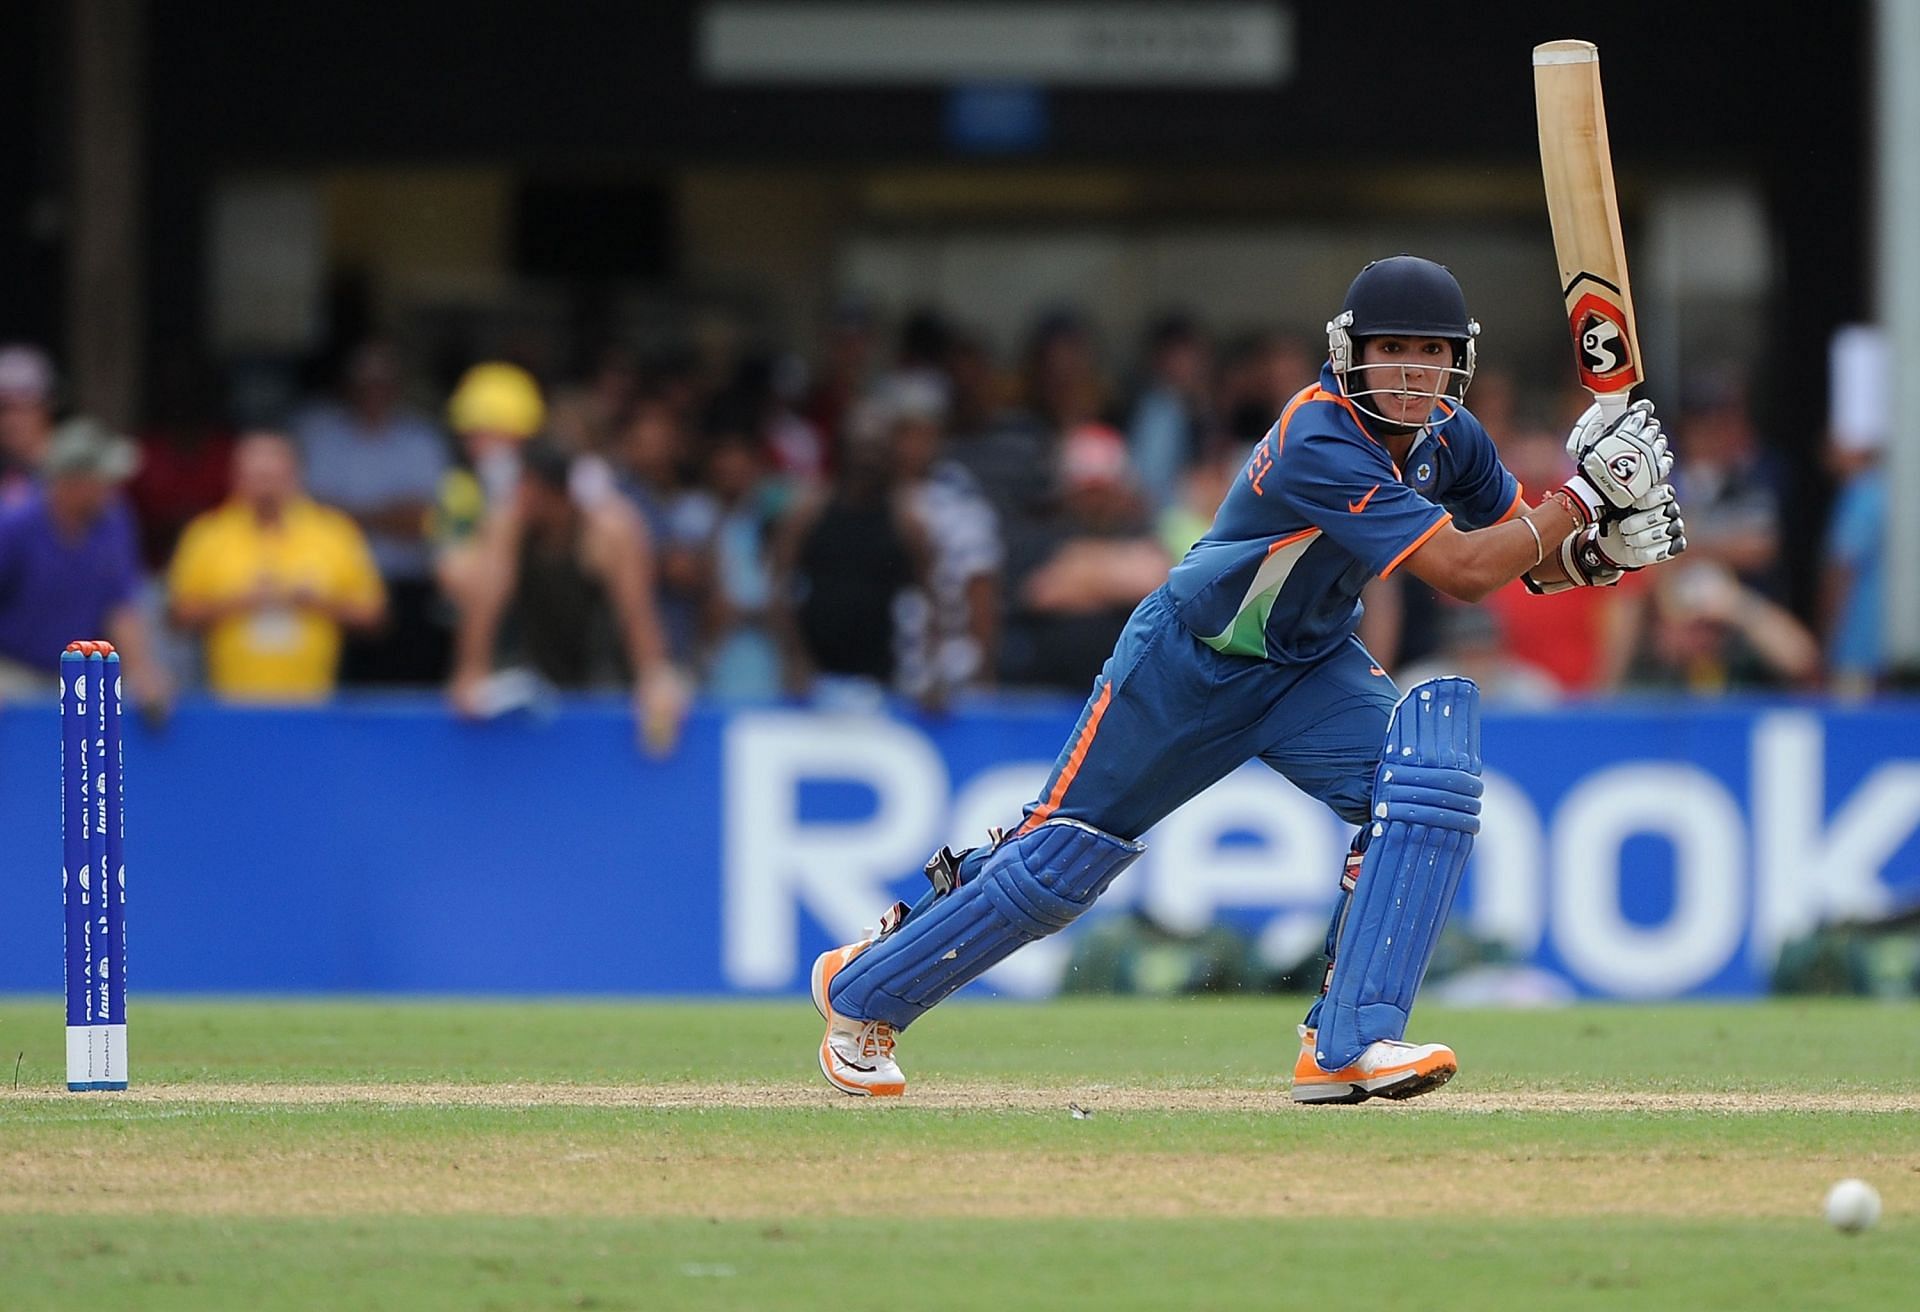 Smit Patel during the ICC U19 Cricket World Cup 2012 Final. [Getty Images]